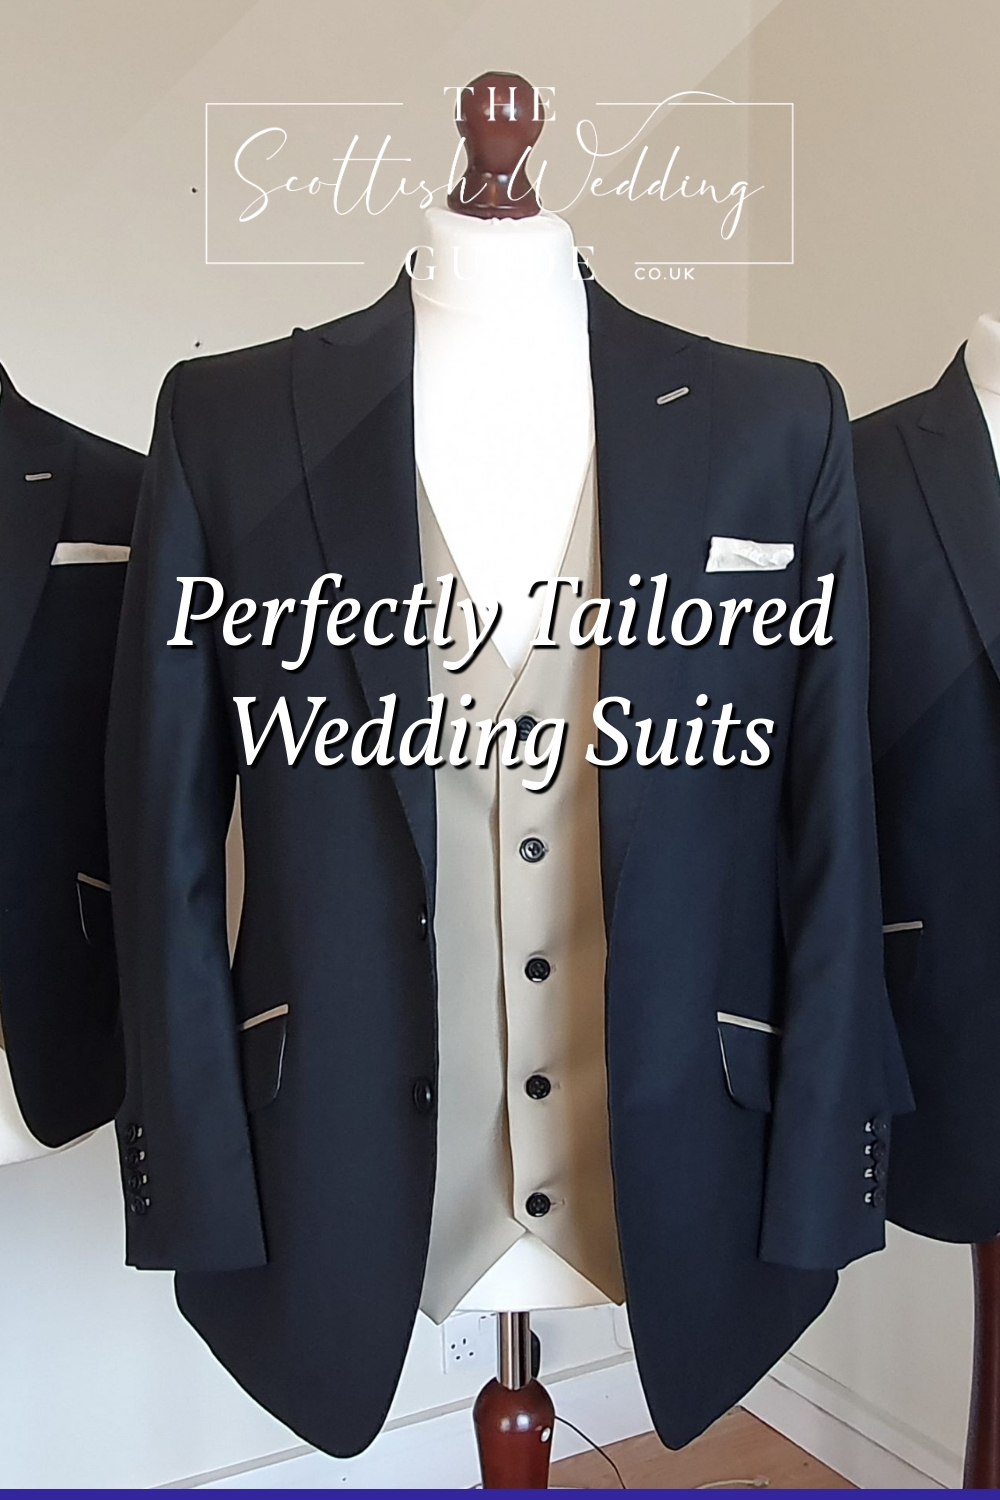 Perfectly Tailored Wedding Suits